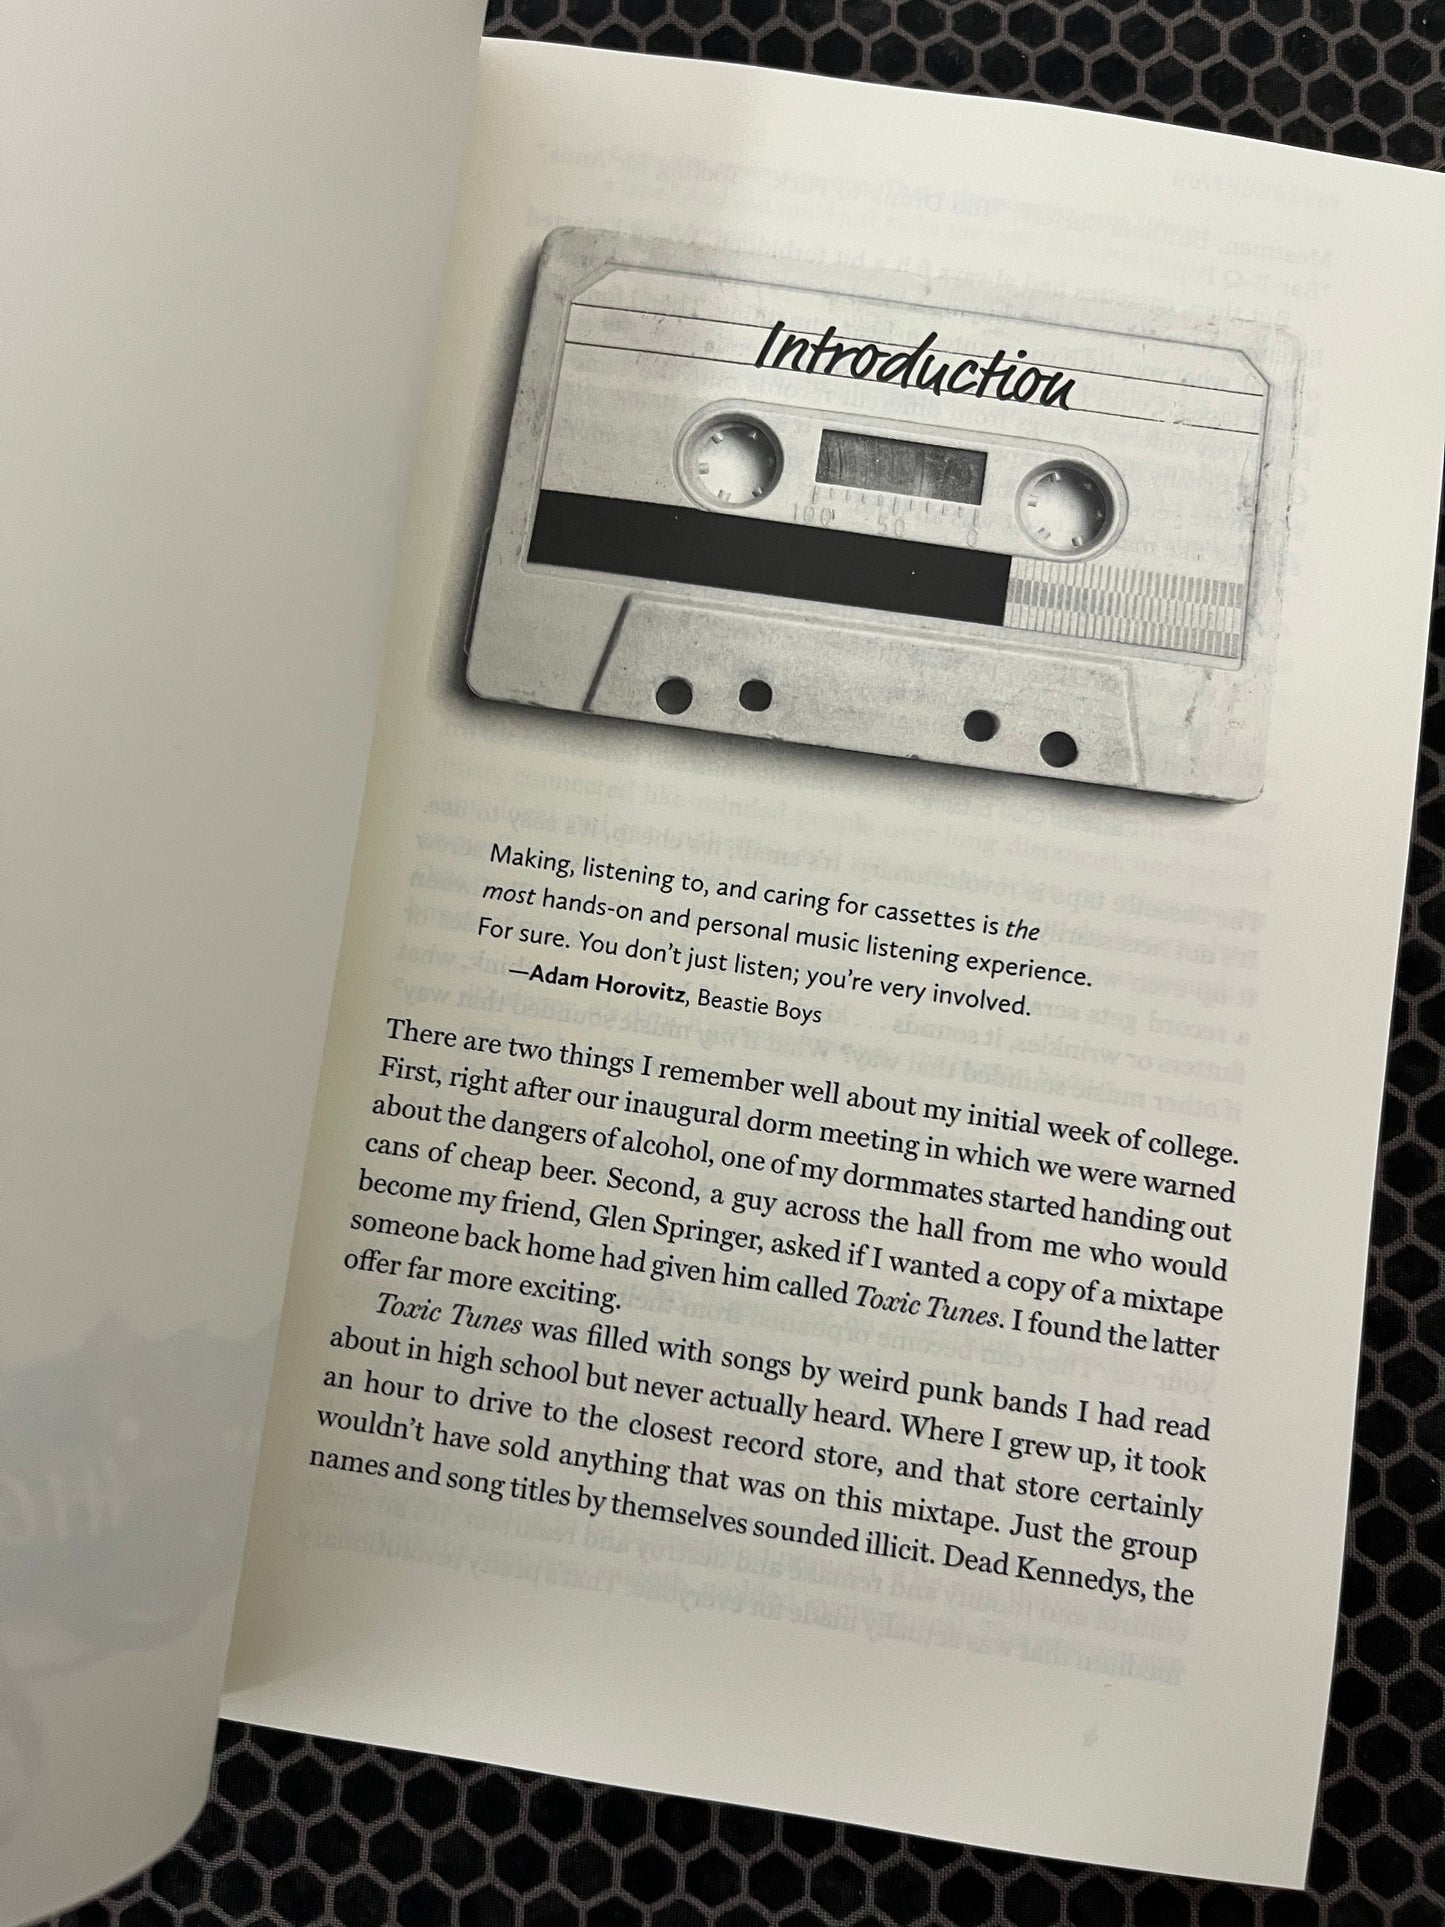 High Bias: The Distorted History of the Cassette Tape